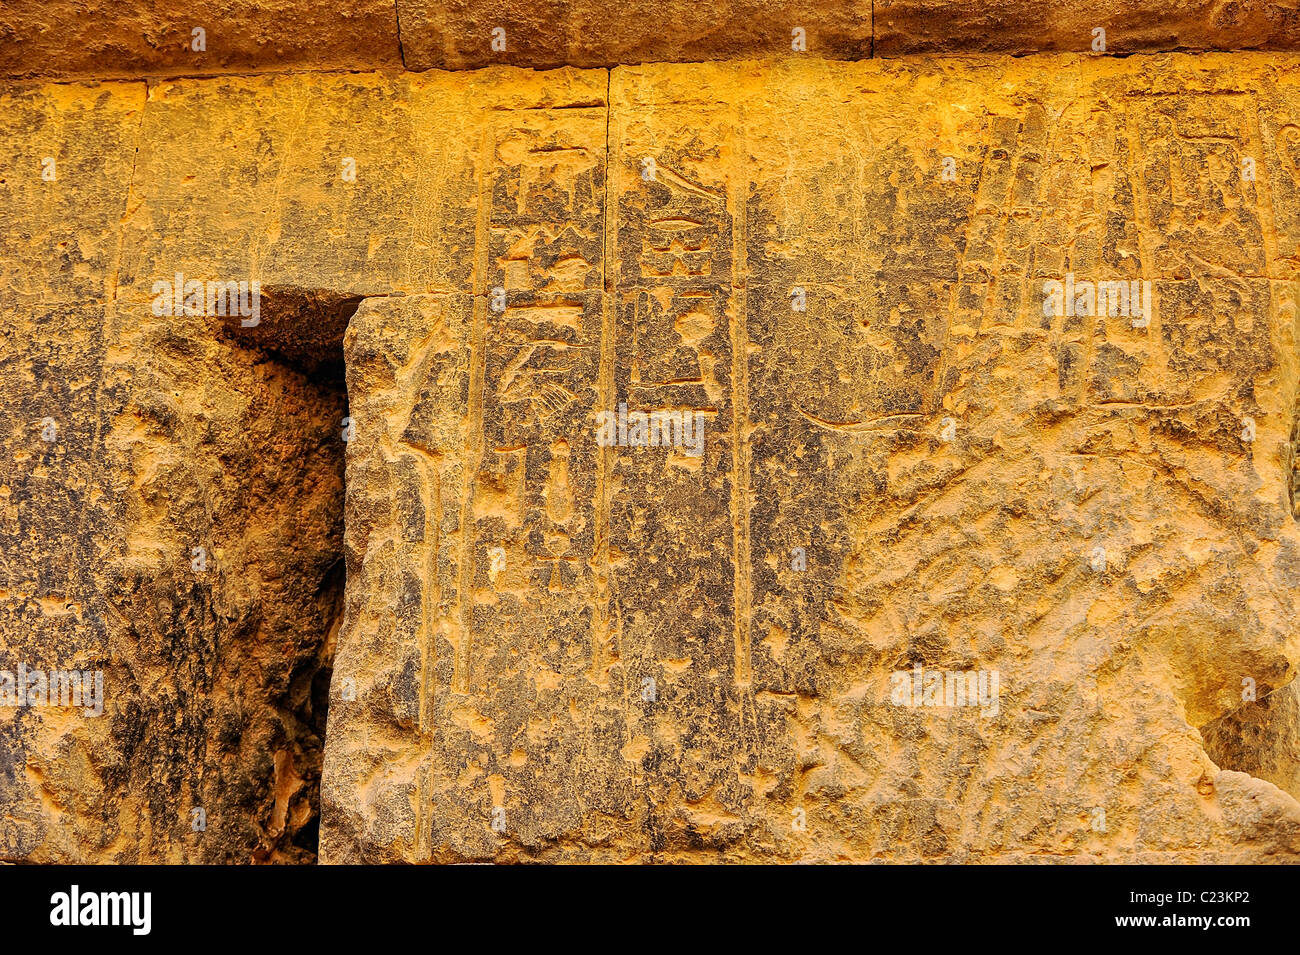 Hieroglyph signs on a wall of the temple of Umm Ubayda, dedicated to the cult of Amun in the Siwa oasis, western desert, Egypt Stock Photo